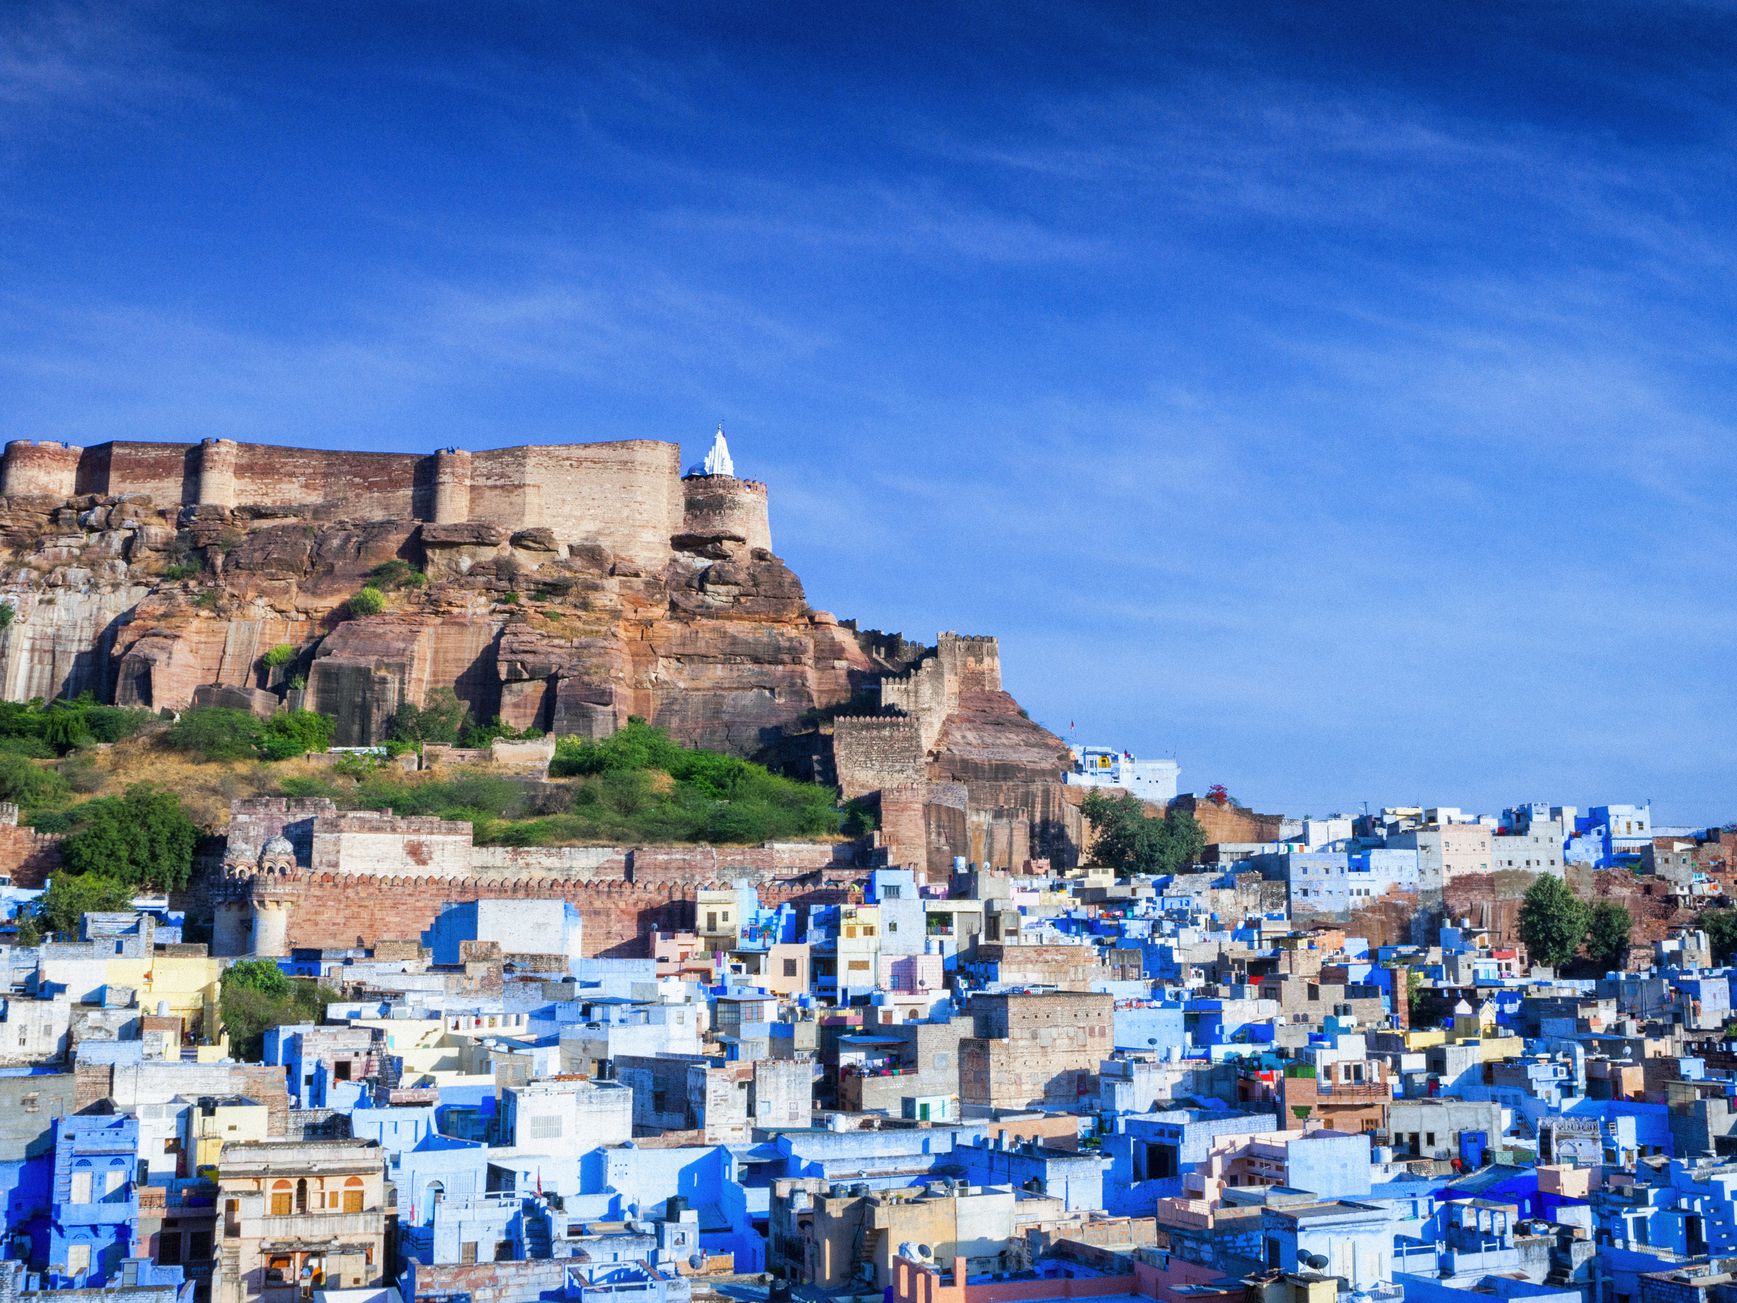 Rajasthan tour packages at low cost